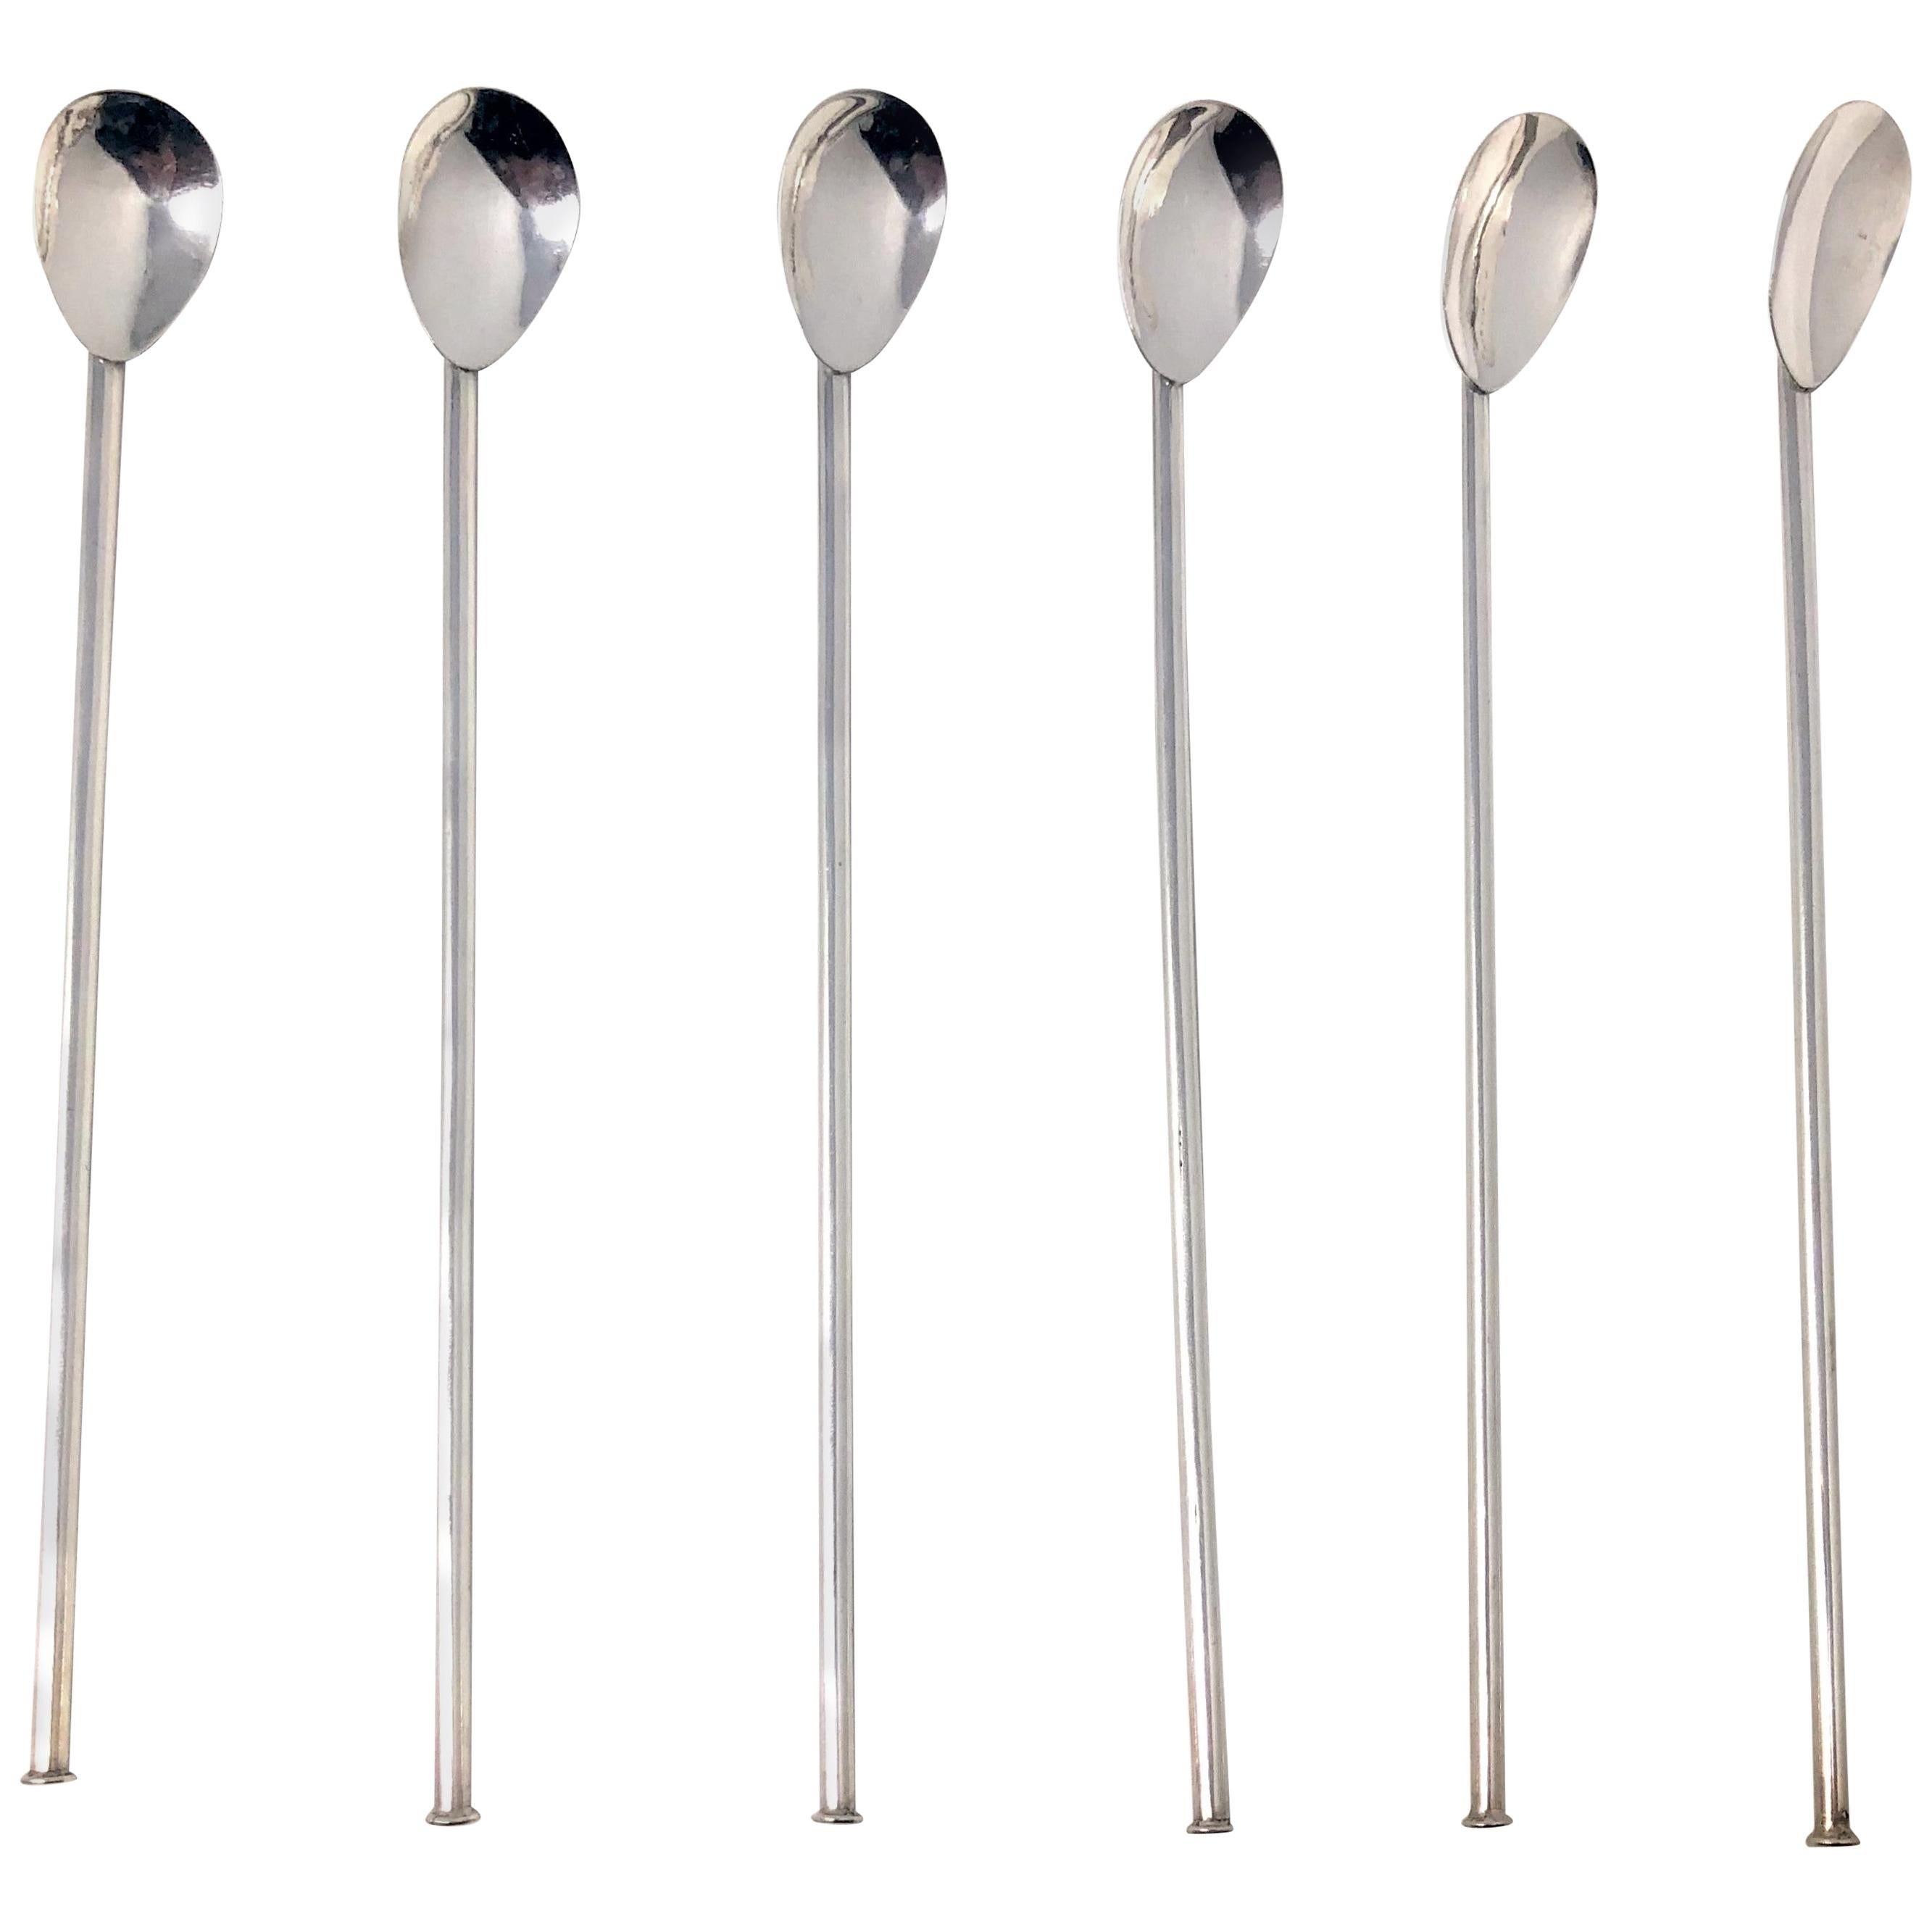 Set of 6 Estate American Sterling Silver Ice Tea Stir Spoons and Straws